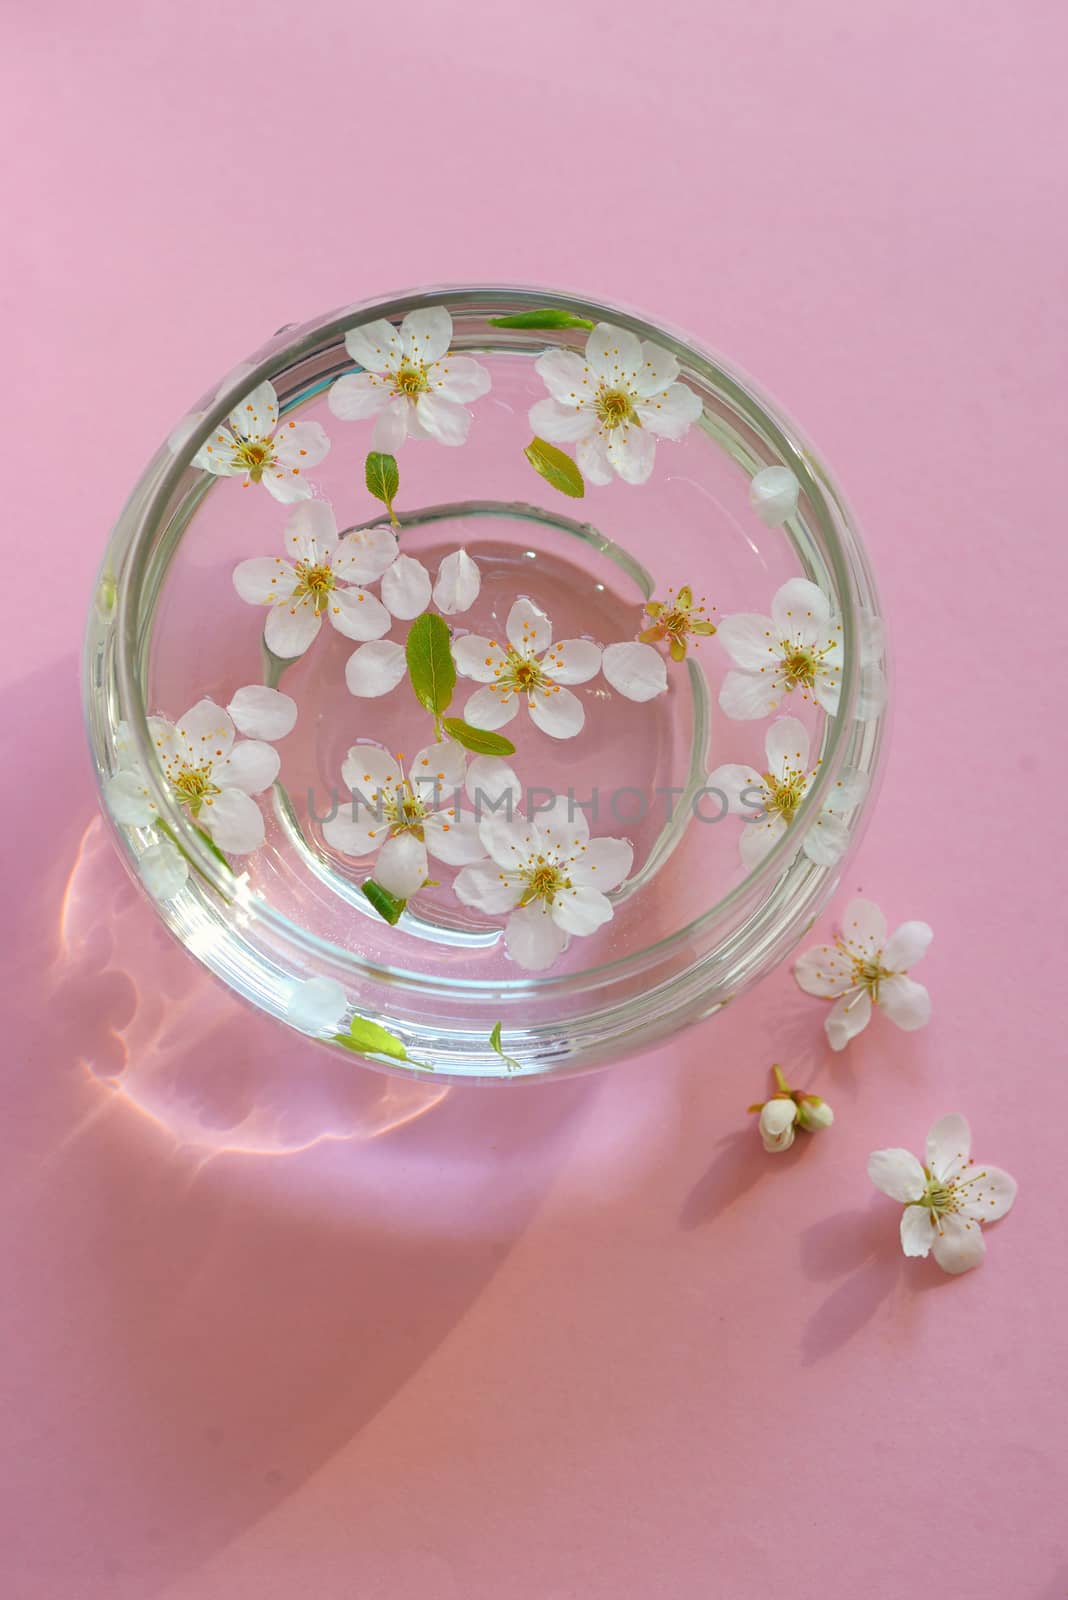 Cherry blossom twig with water bowl on pink background